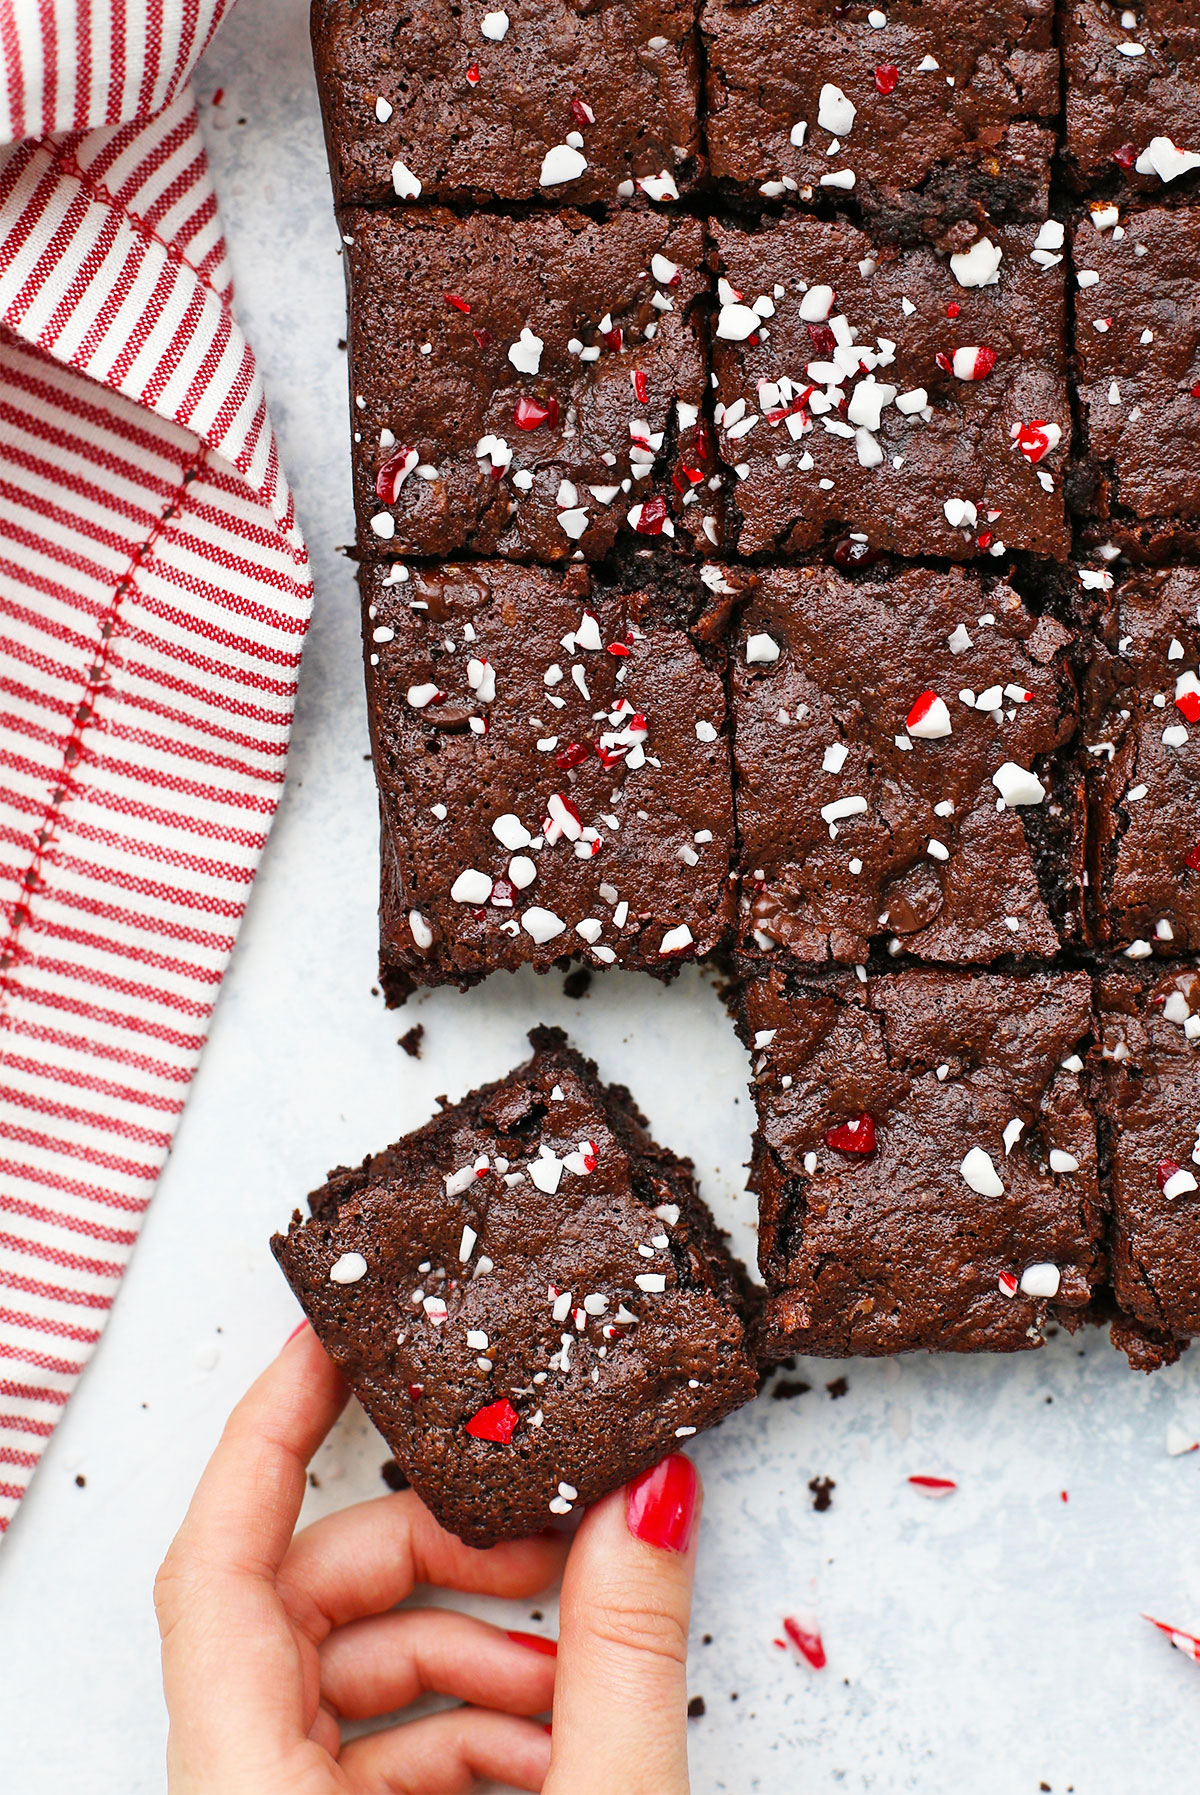 Hand taking a gluten free peppermint brownie